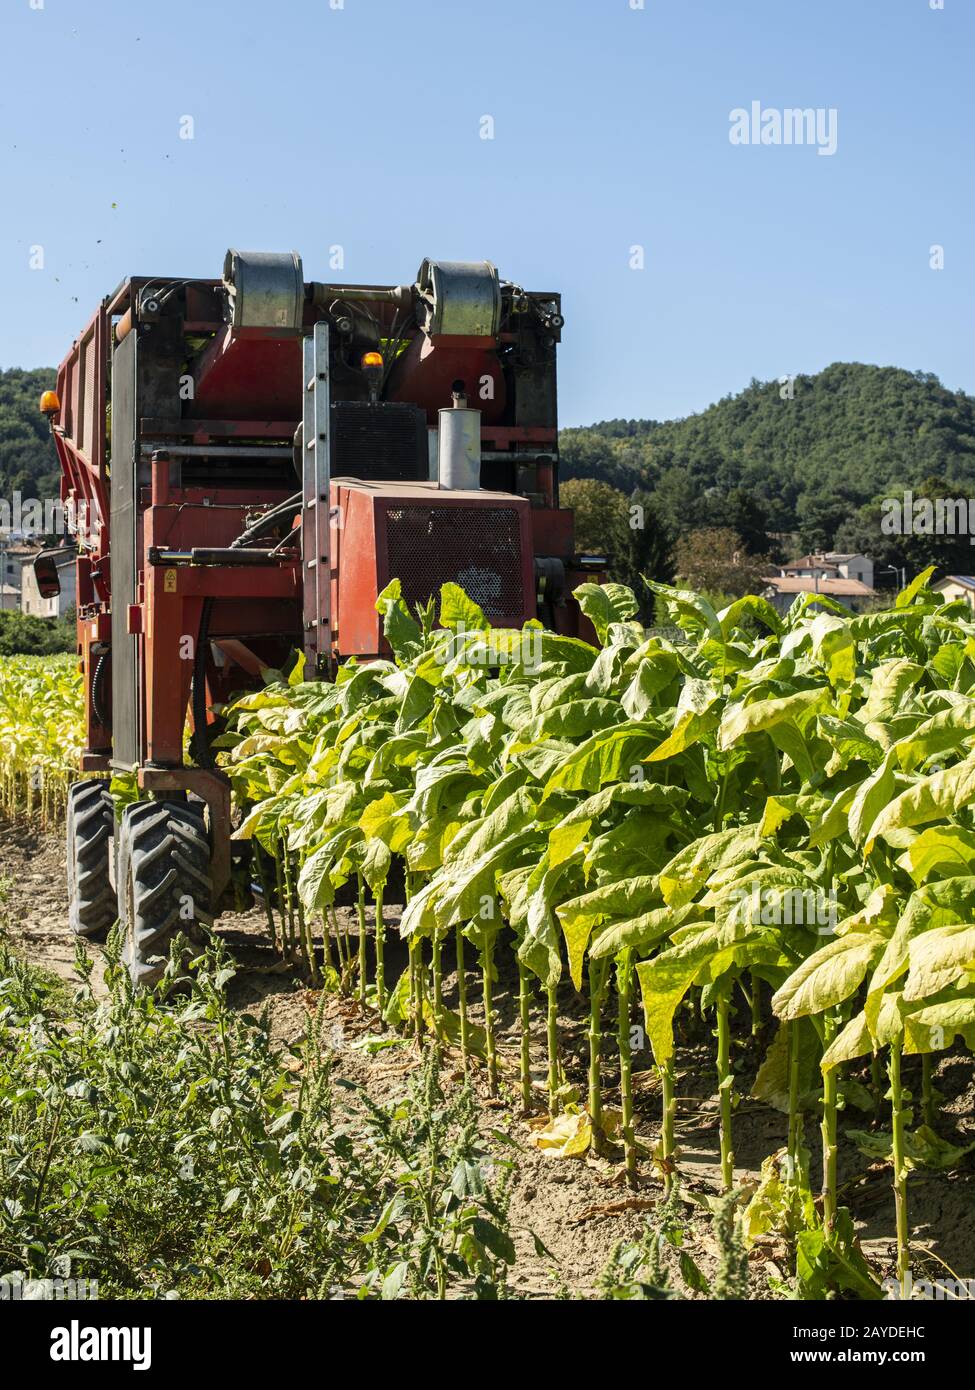 Harvesting tobacco leaves with harvester tractor Stock Photo